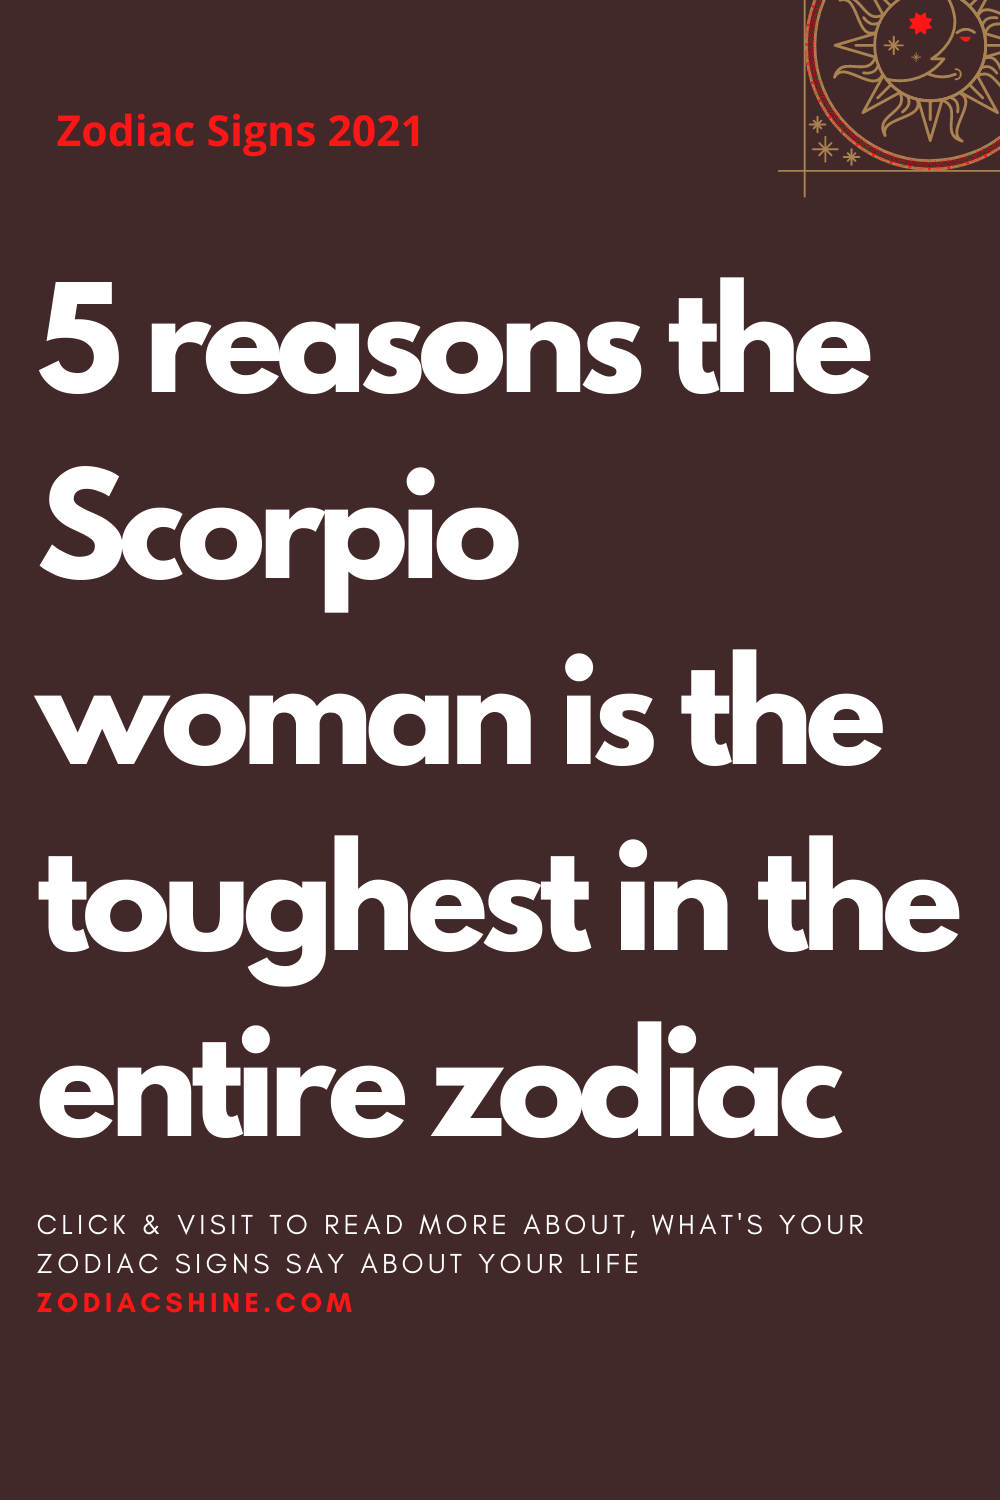 5 Reasons The Scorpio Woman Is The Toughest In The Entire Zodiac